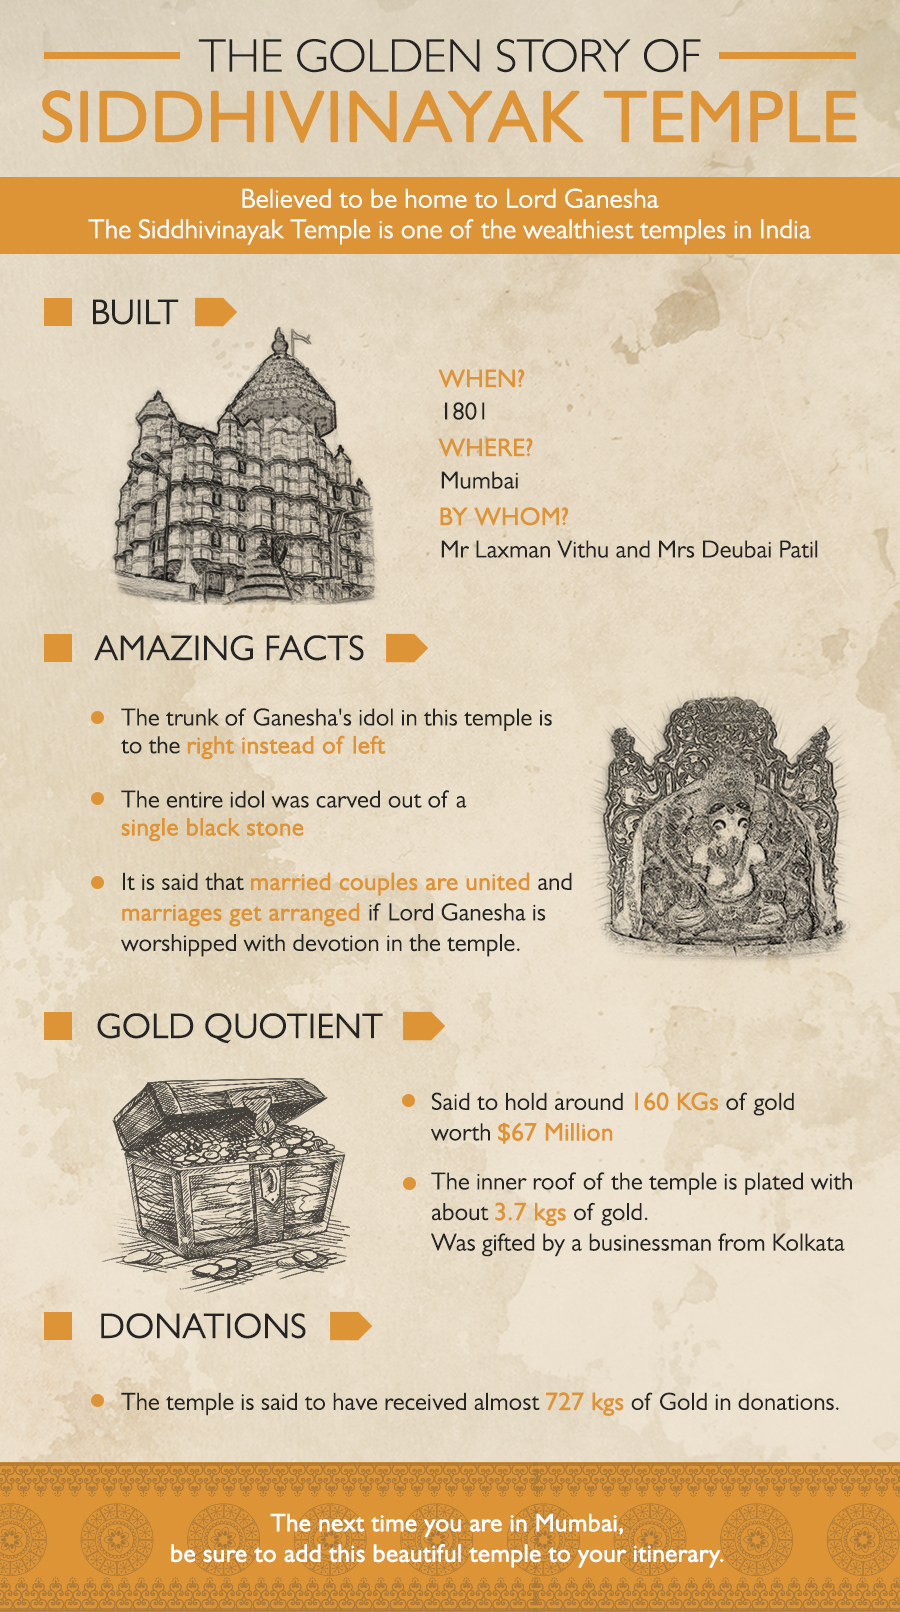 Built to honour Lord Ganesha, the Siddhivinayak temple in Mumbai was built in 1801 holds around 160 Kgs of gold. Check out more amazing facts about this famous temple and why it's a must visit destination.